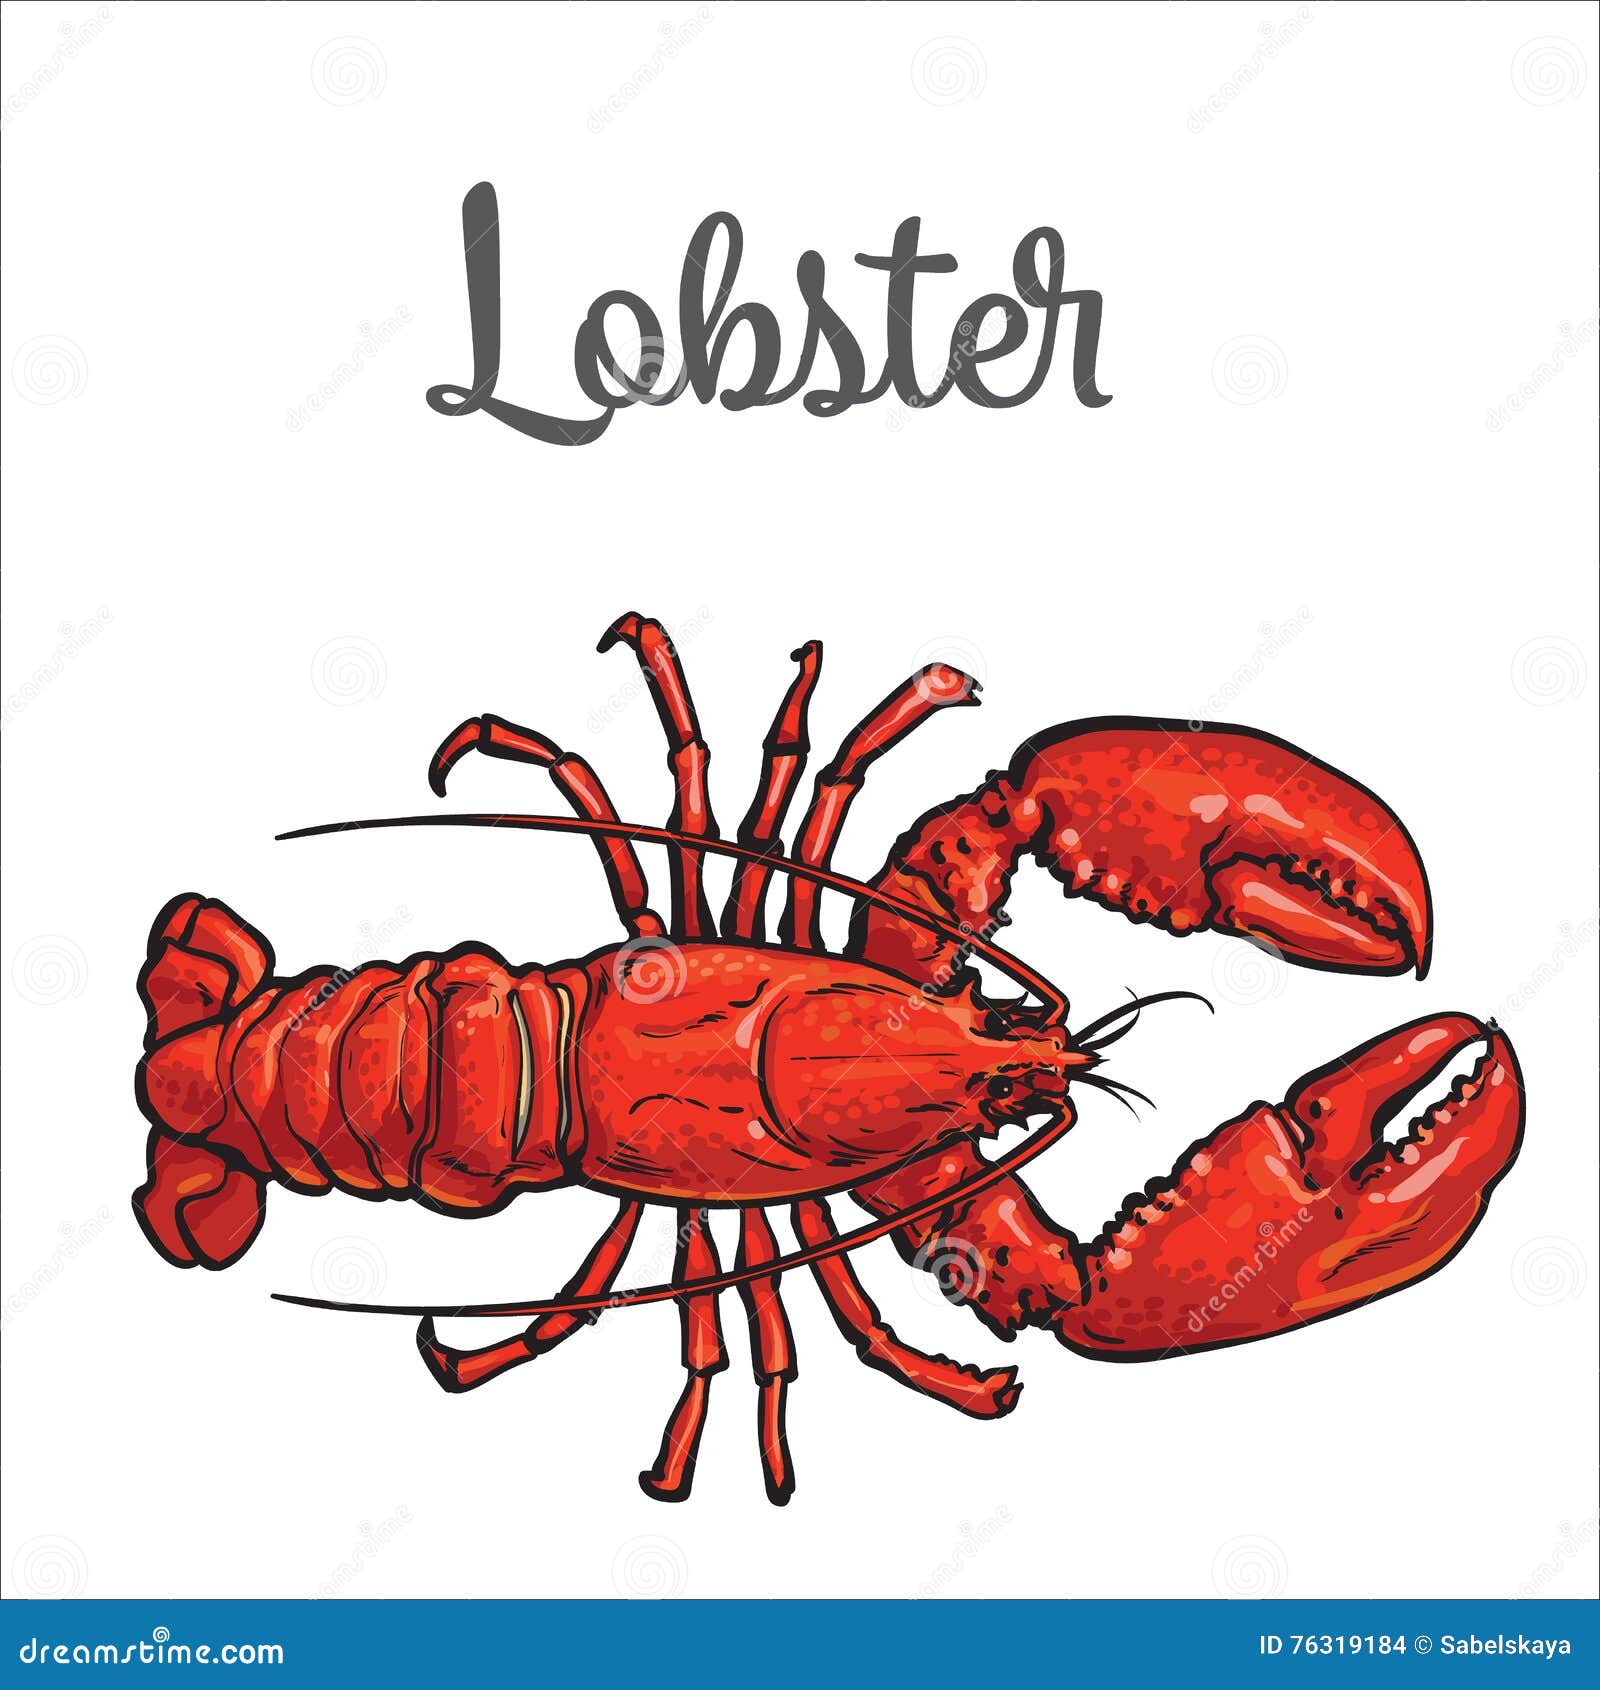 Lobster Pencil Drawing Stock Illustrations  76 Lobster Pencil Drawing  Stock Illustrations Vectors  Clipart  Dreamstime